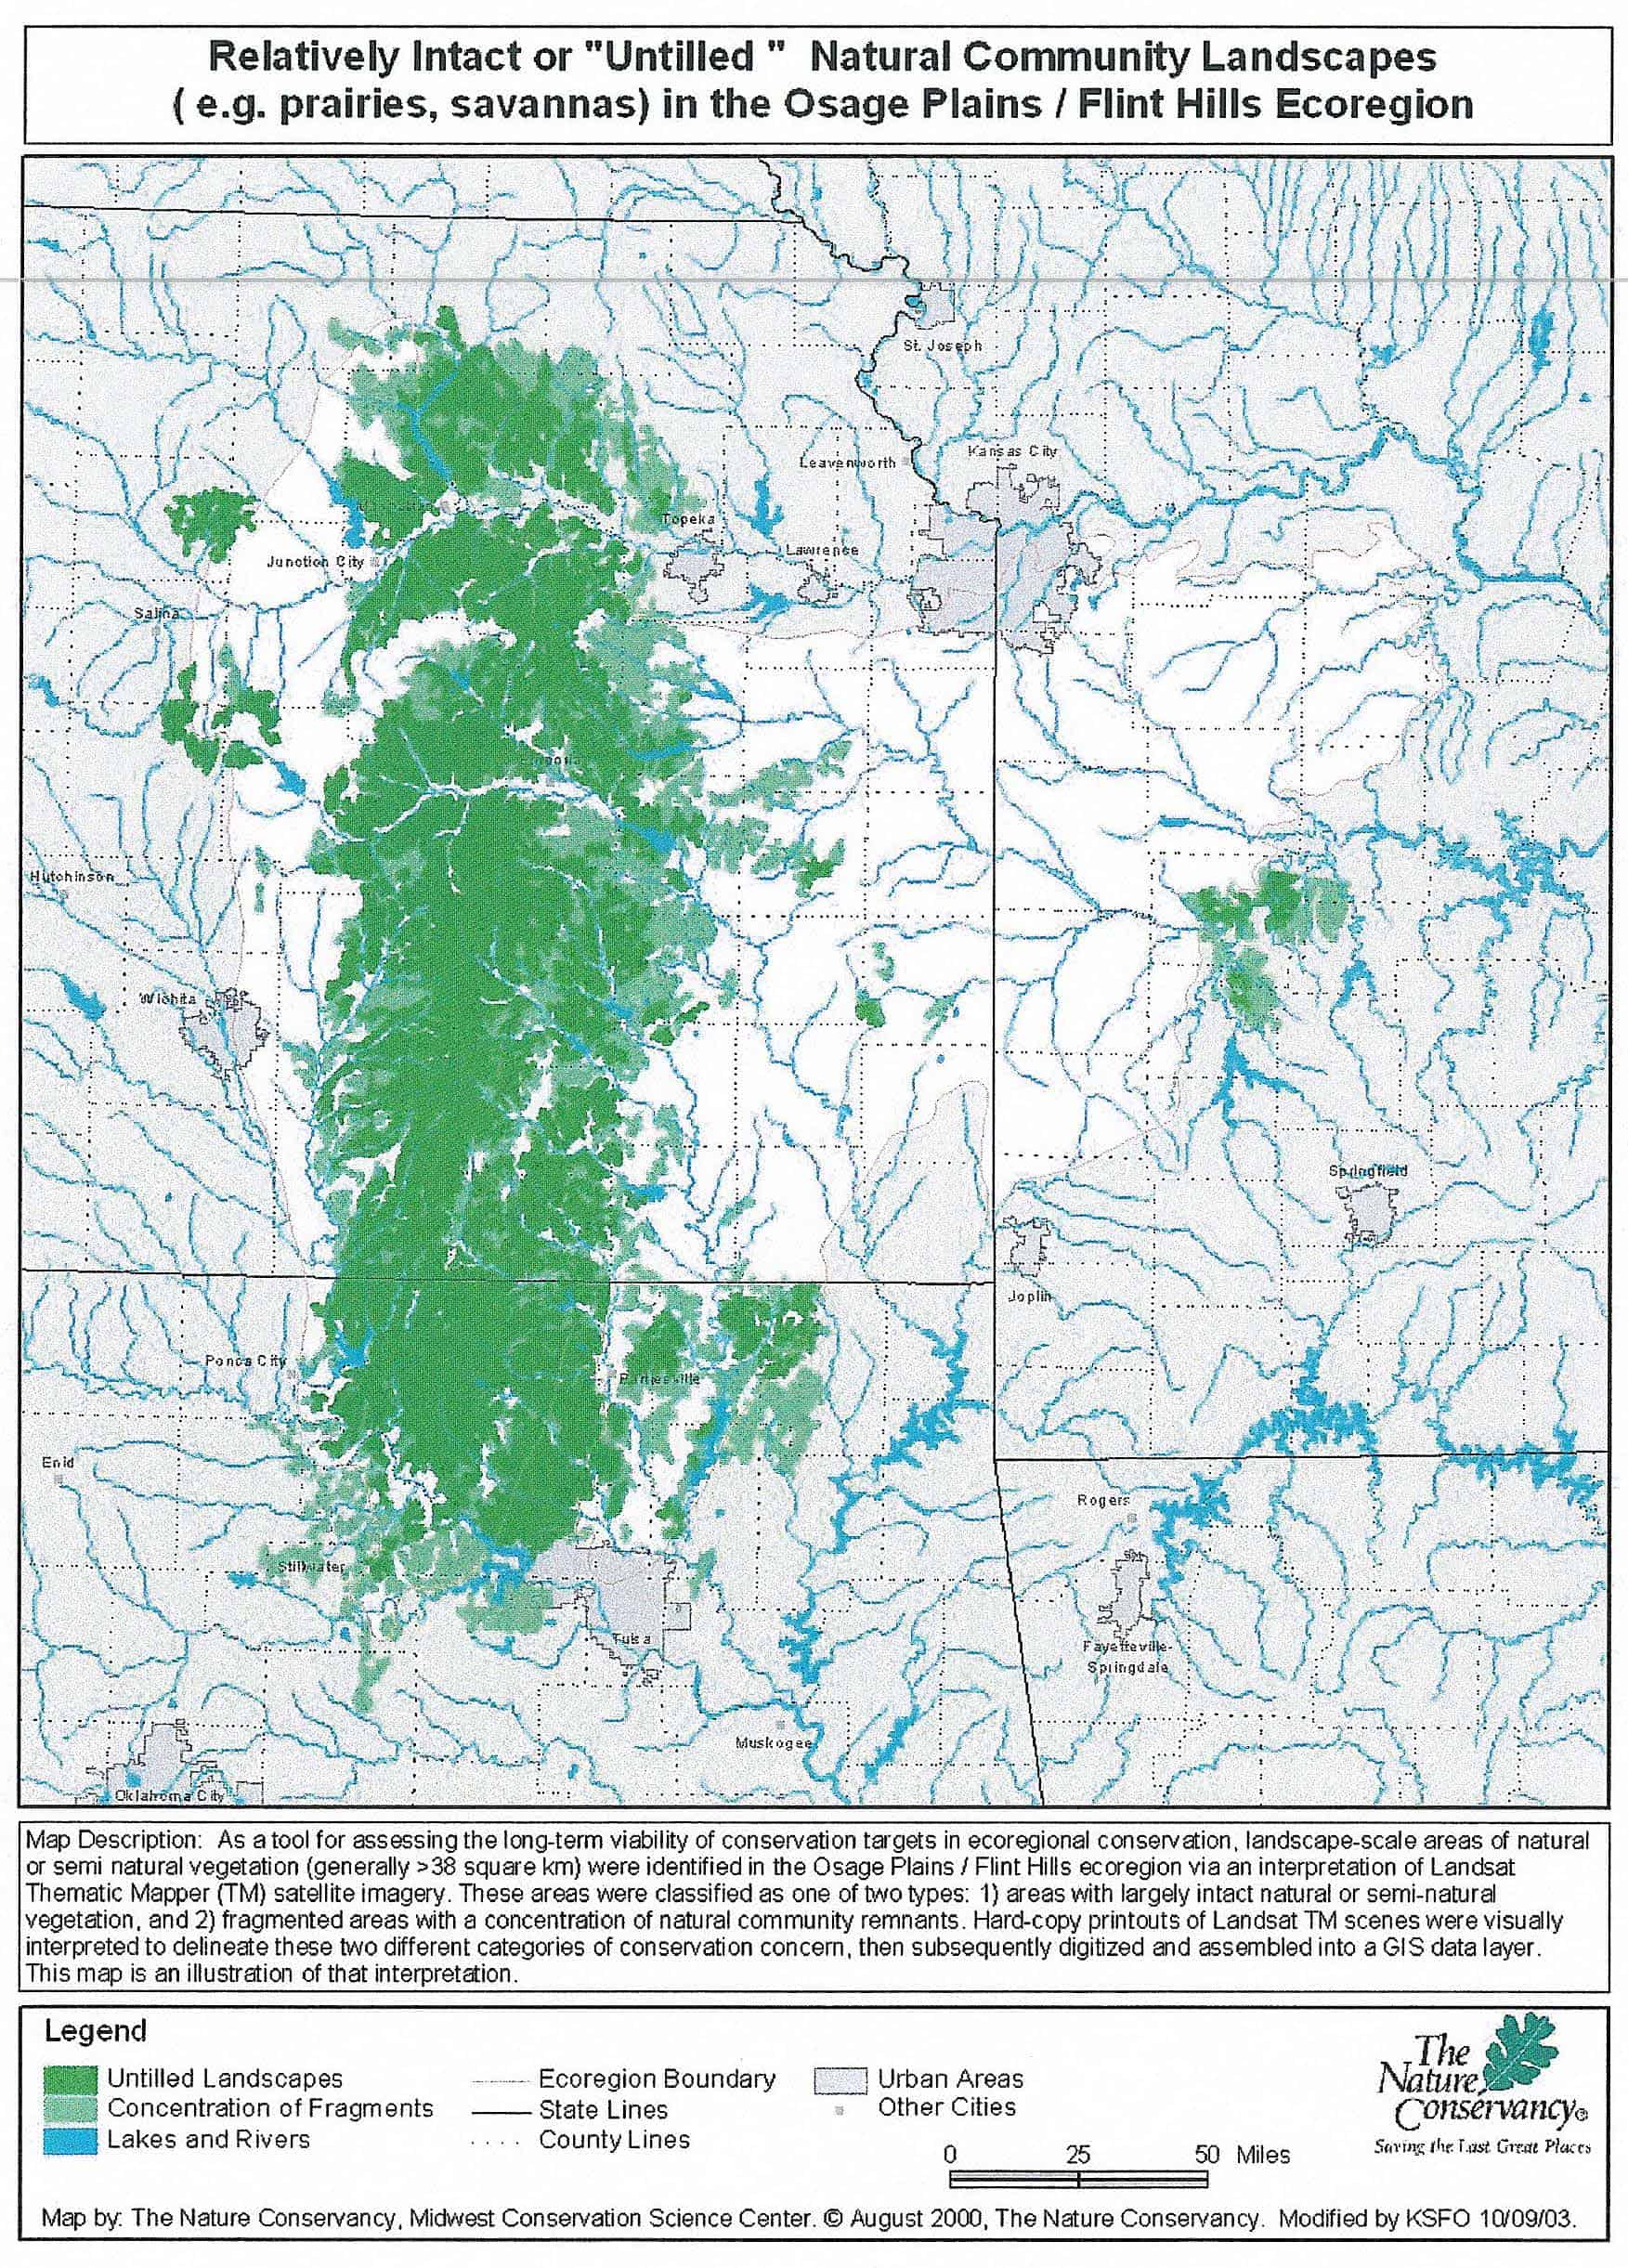 The relatively intact or “untilled” natural community landscapes in the Osage Plains/Flint Hills Ecoregion of the Flint Hills Tallgrass Prairie Regional Environmental System within Kansas and Oklahoma